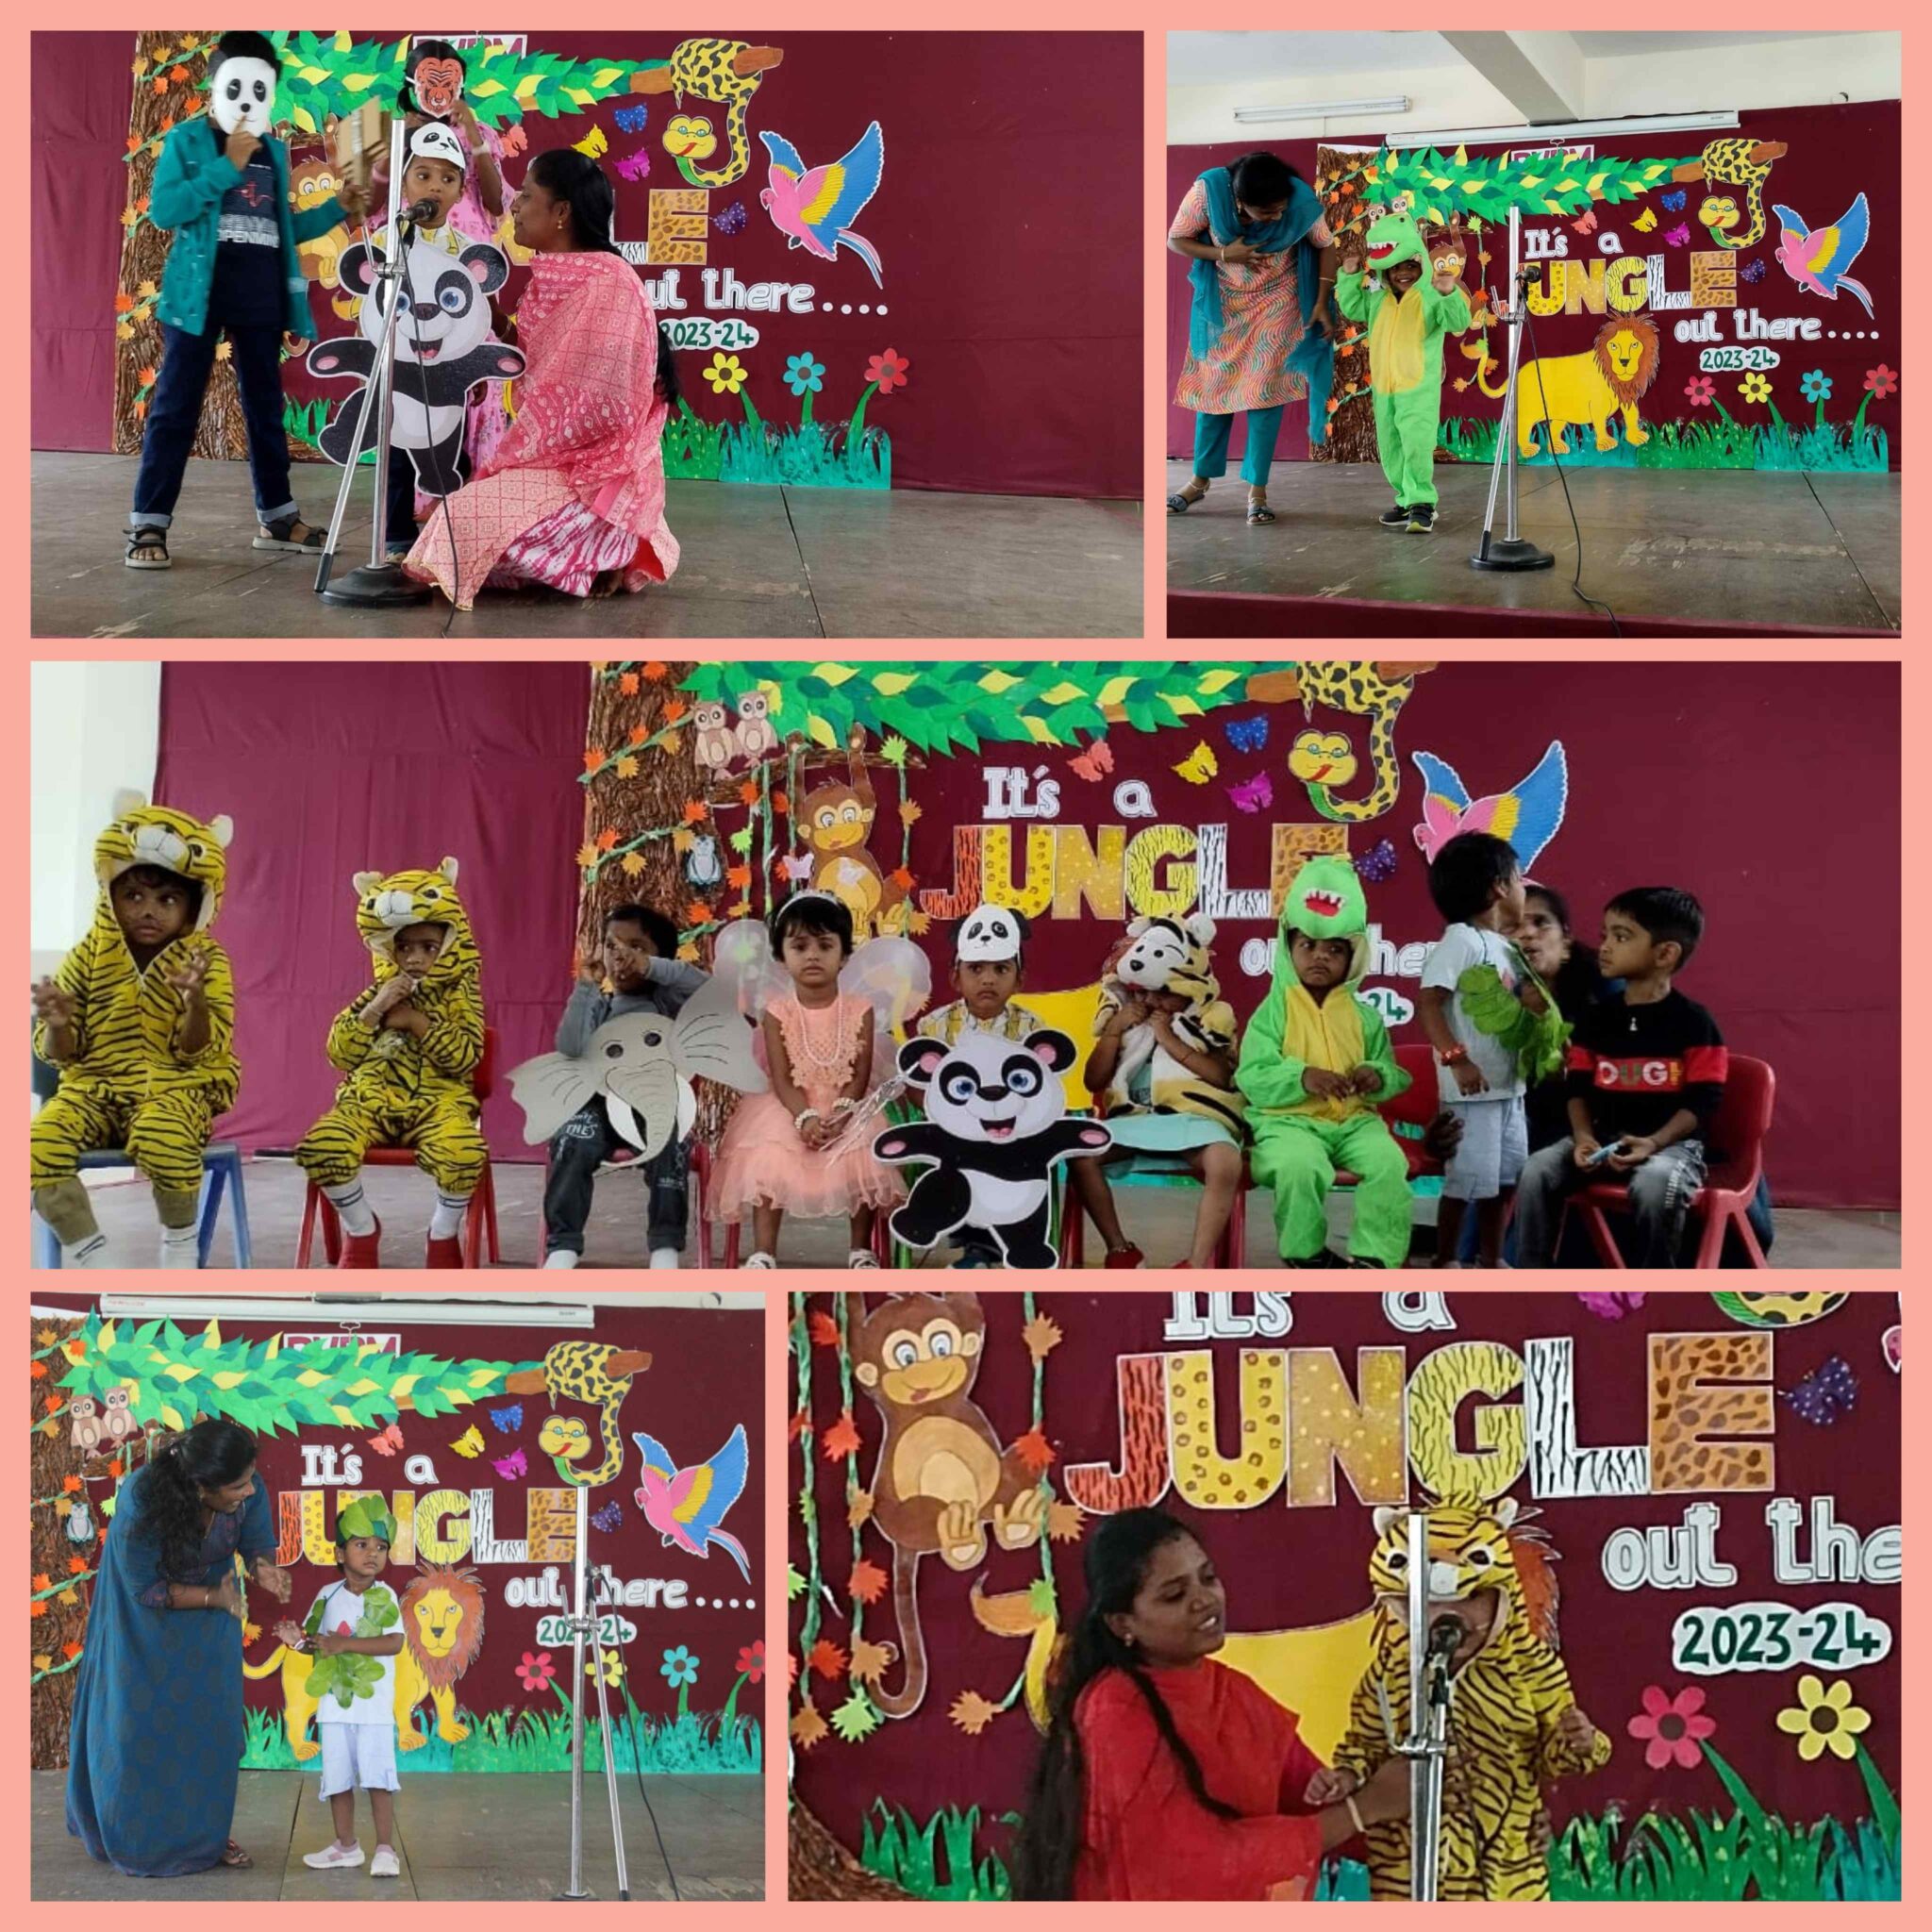 Fabulous performance by our kids-A lot of joy and happiness